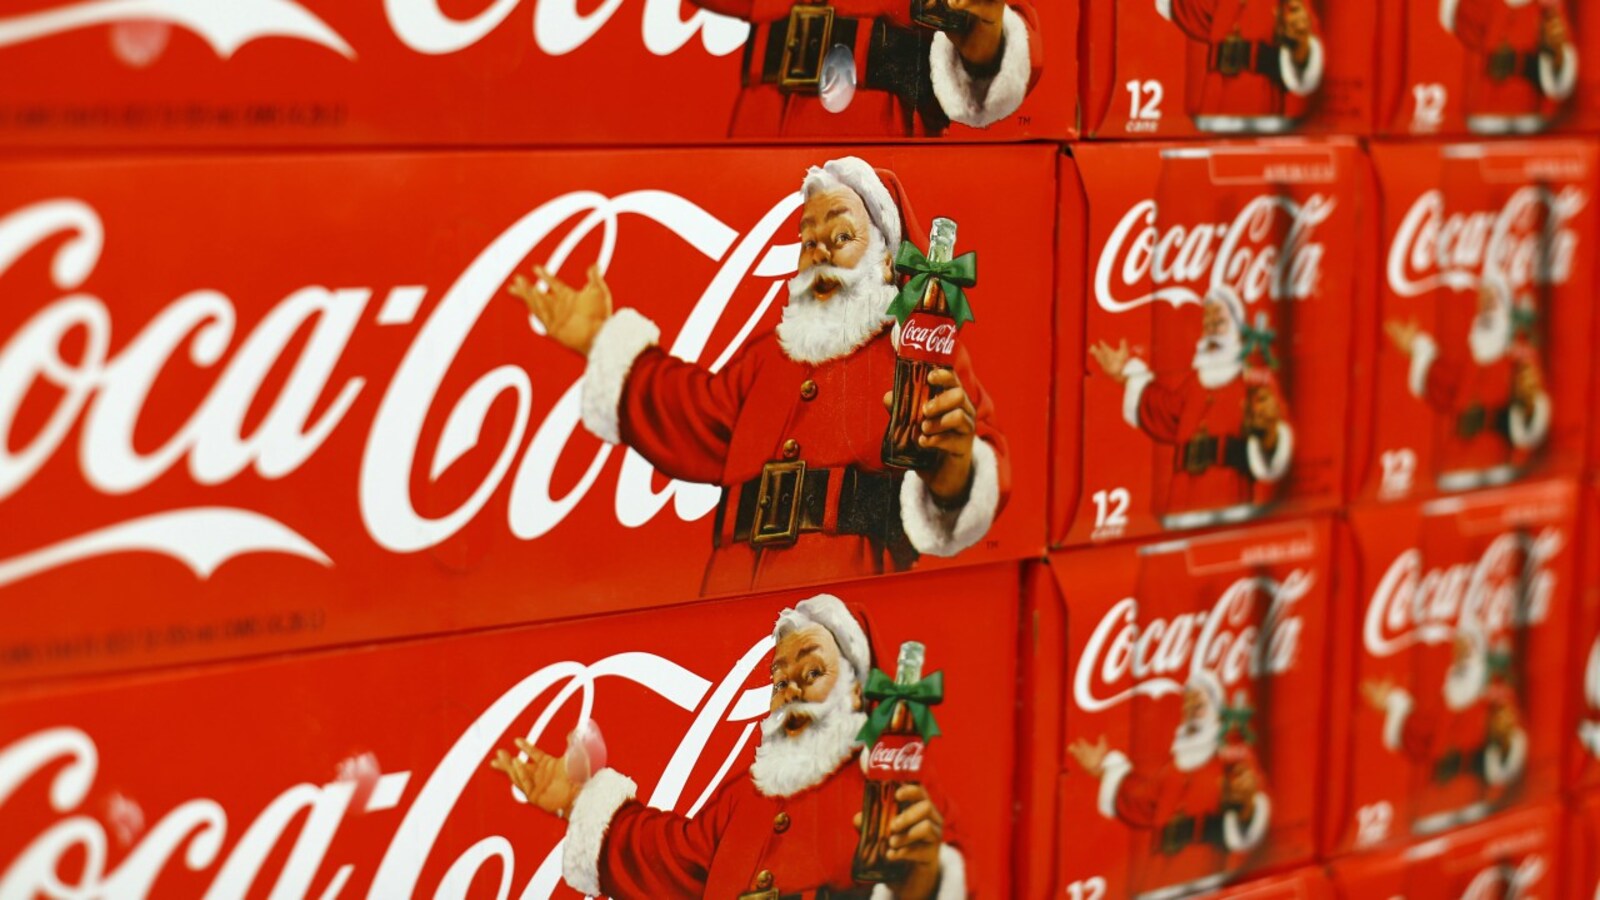 Cola and the how the modern-day Santa Claus came into being